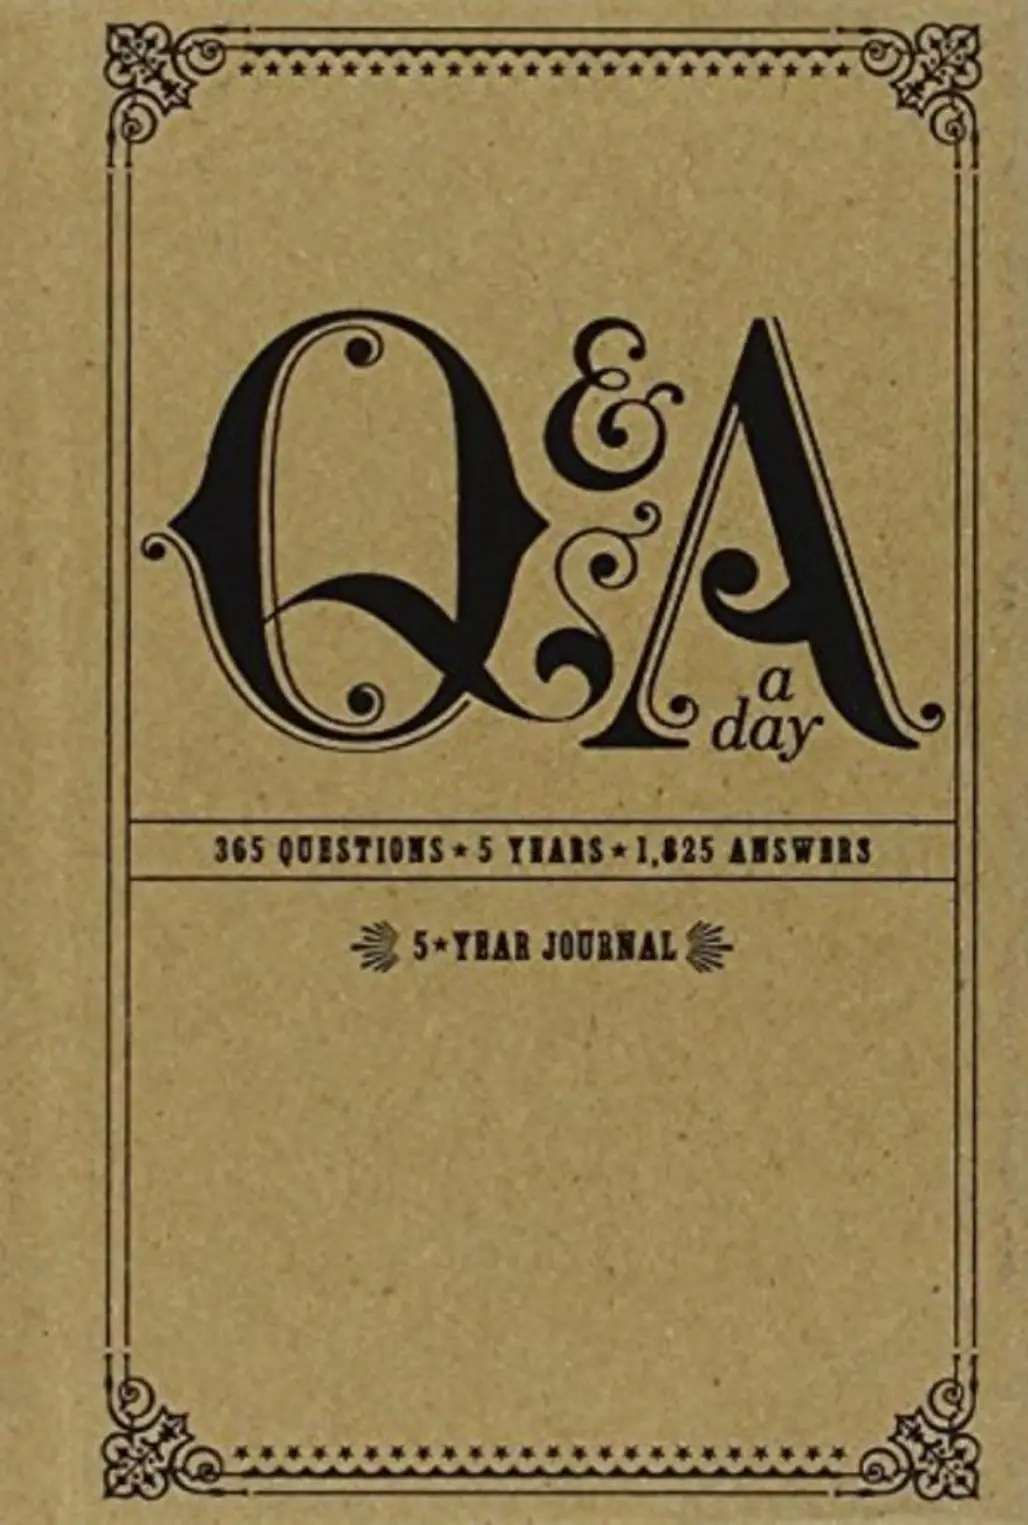 Q&a a Day: 5-Year Journal by Potter Style